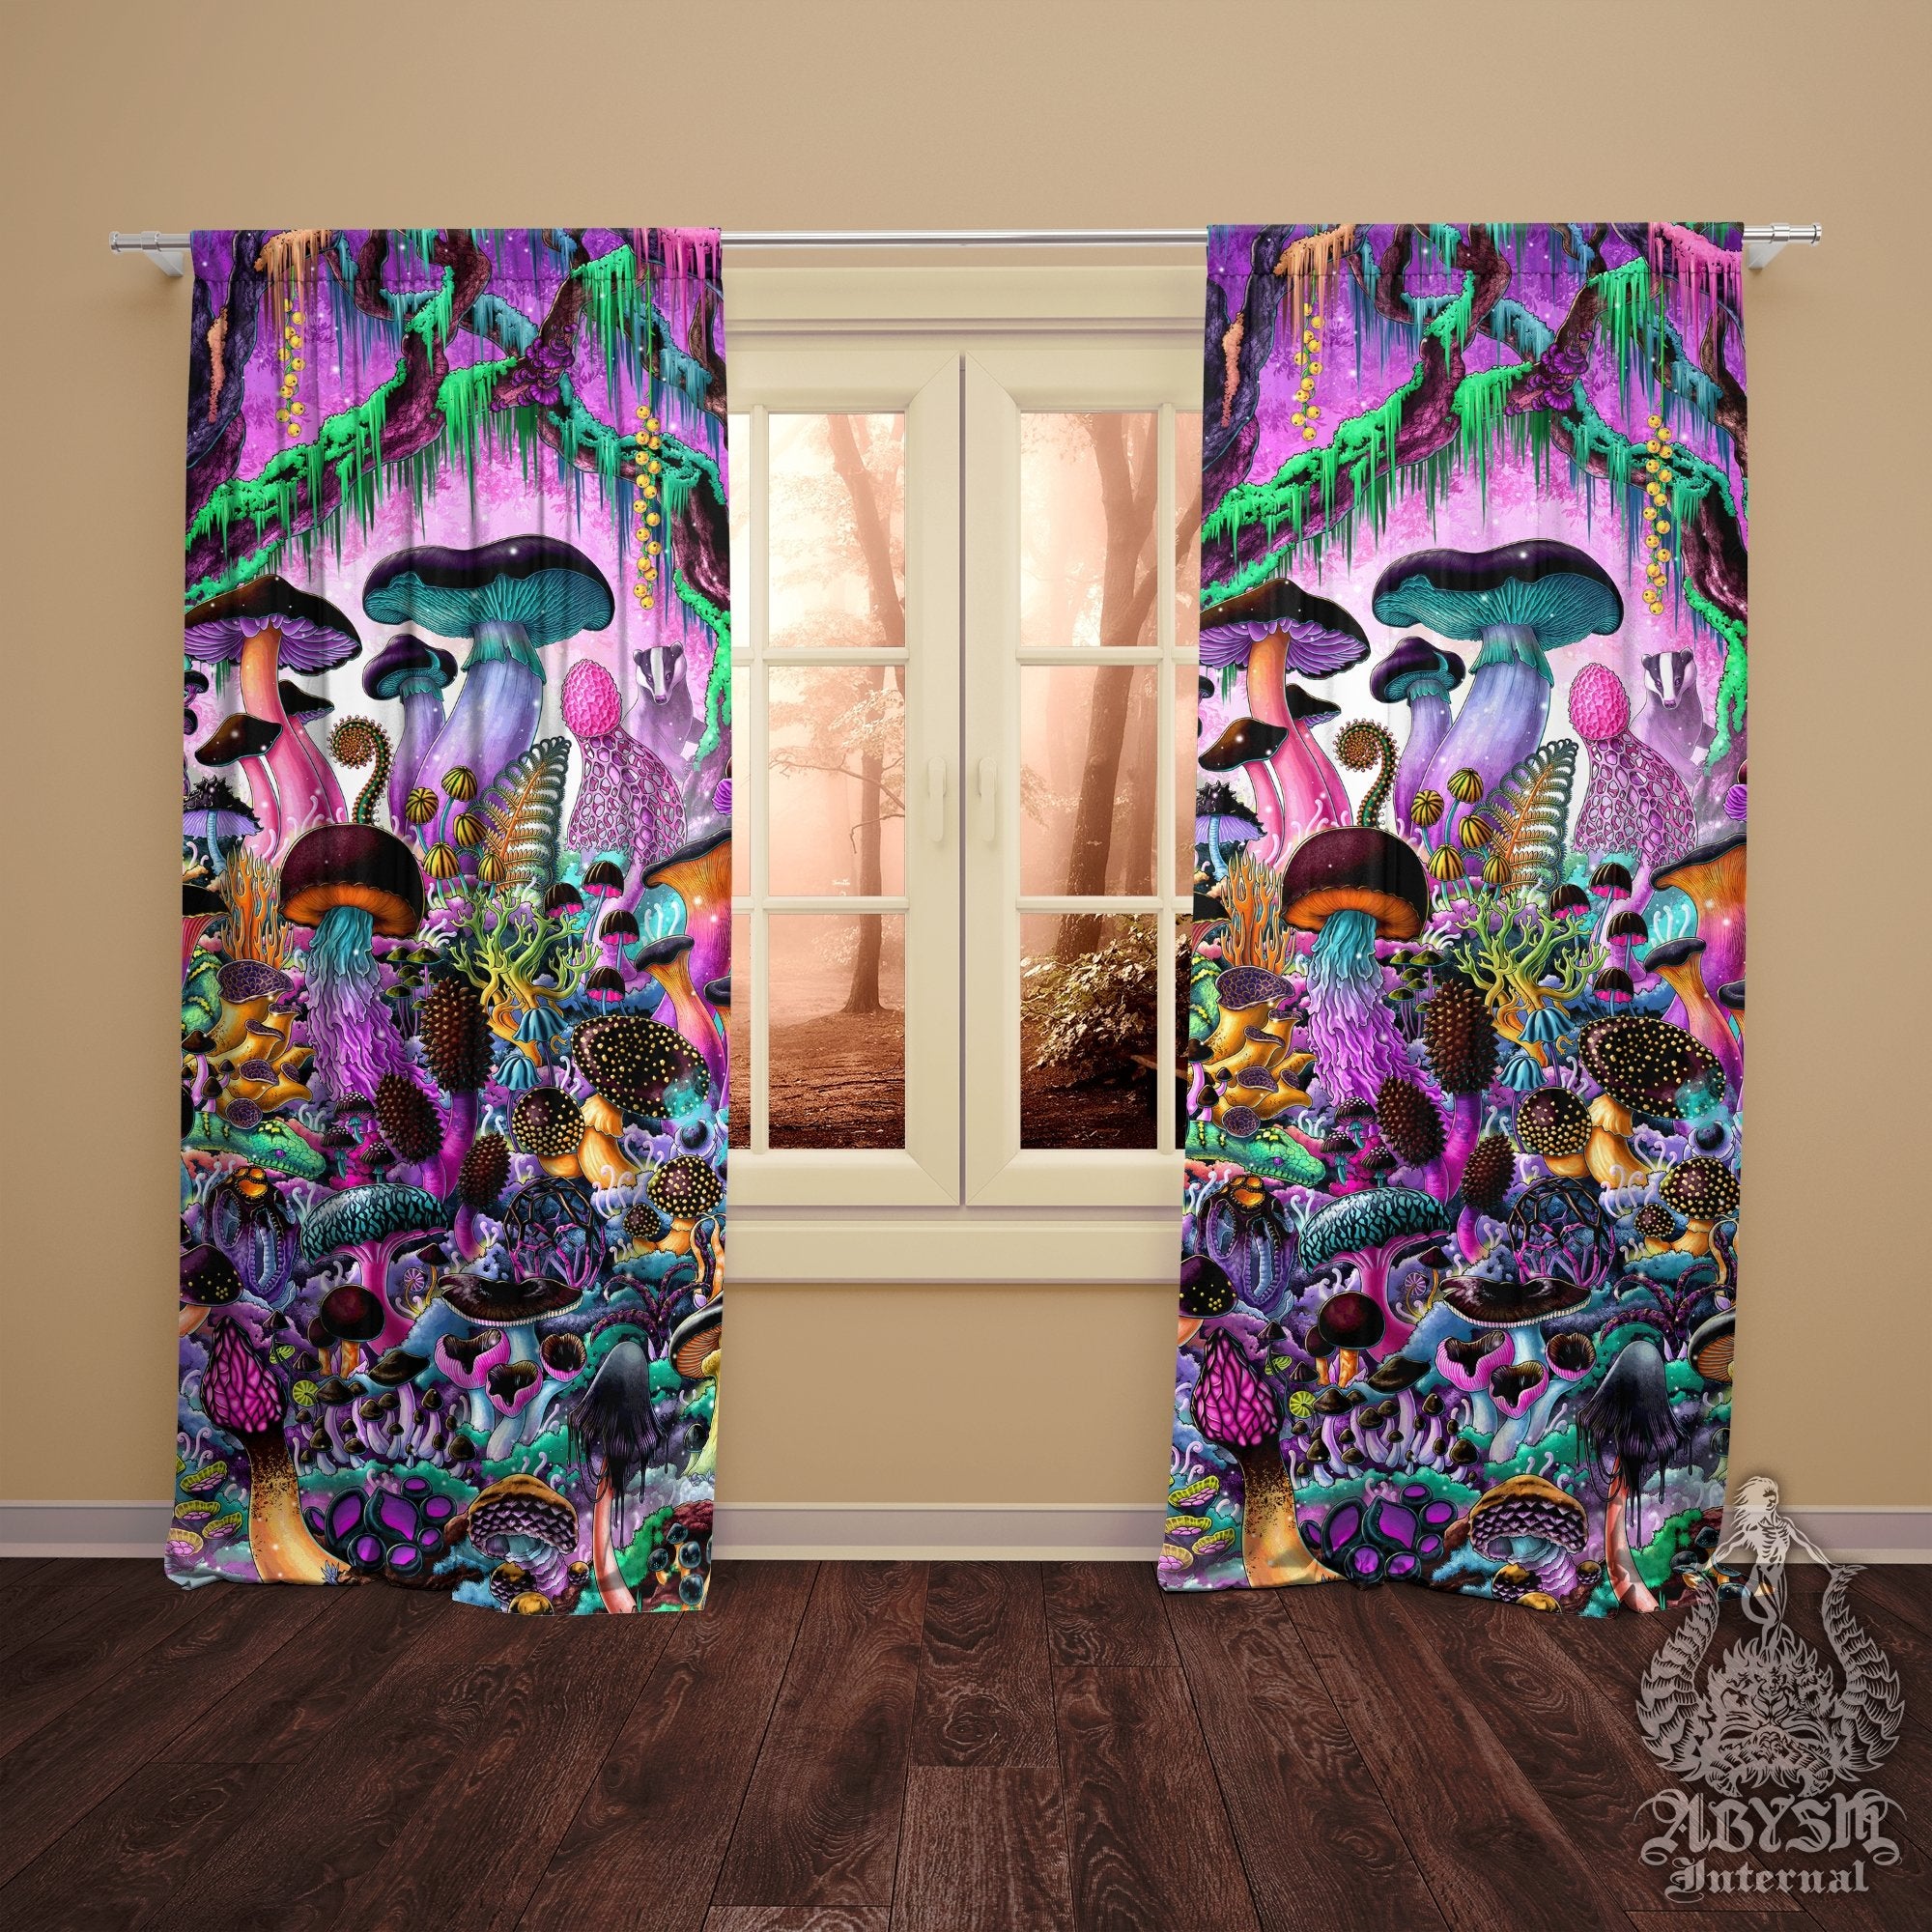 Psychedelic Mushrooms Blackout Curtains, Long Window Panels, Aesthetic Art Print, Girly Kids Room Decor, Gamer Home and Shop Decor - Magic Shrooms, Pastel Black - Abysm Internal